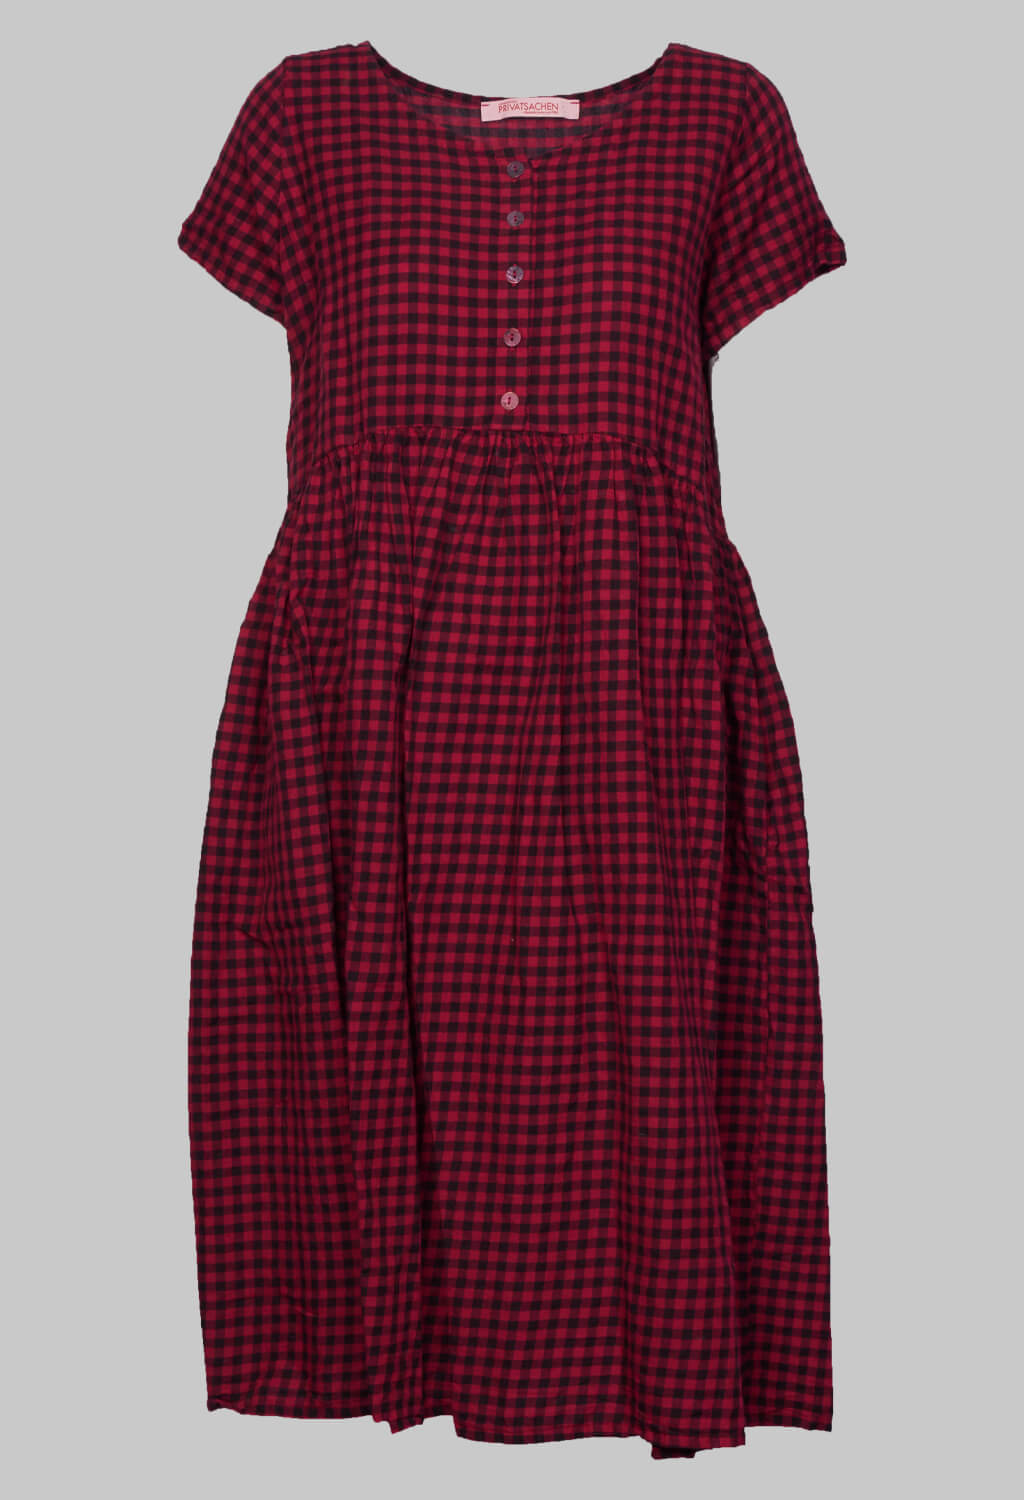 Lobideal Checkered Dress in Himbeer Red and Black Check